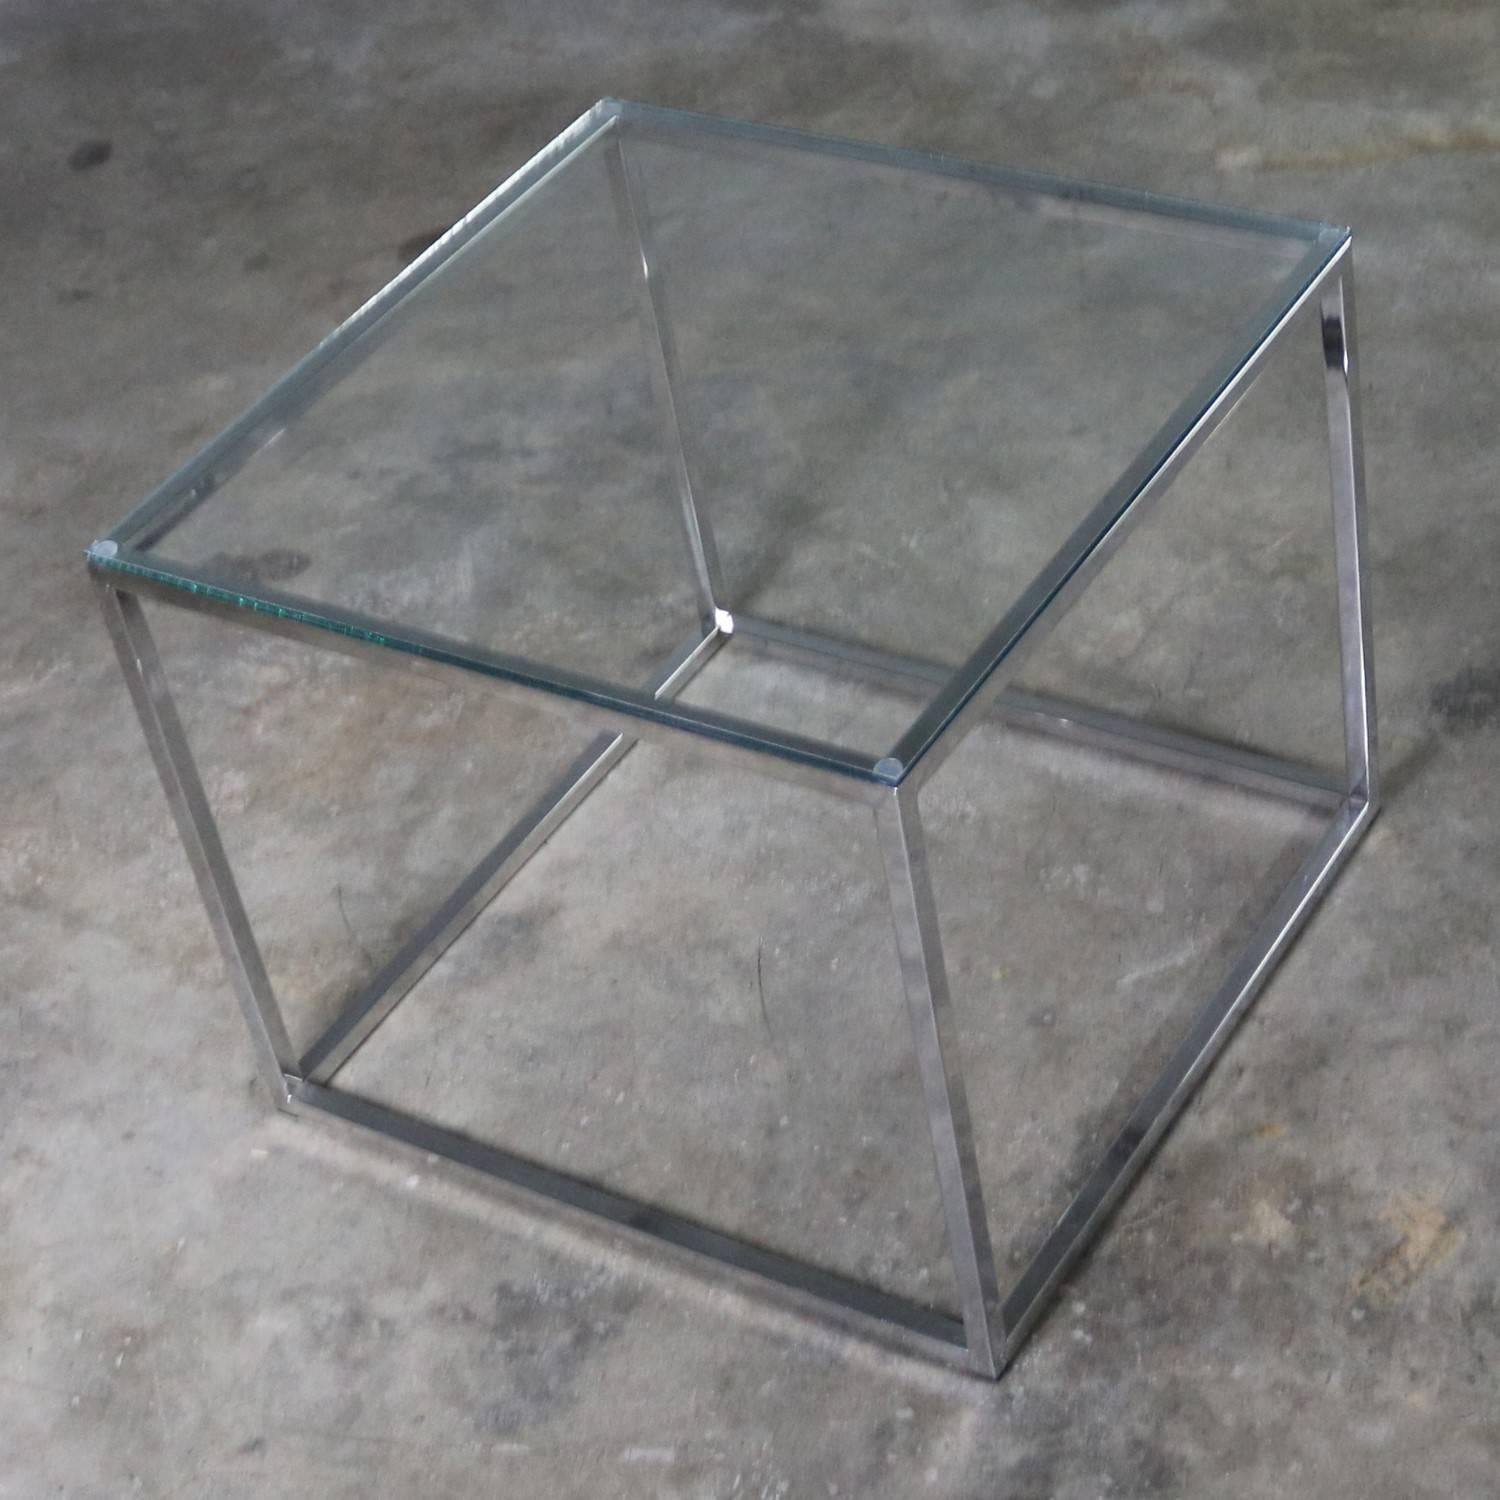 Chrome Cube End Table with Glass Top Manner of Milo Baughman 1